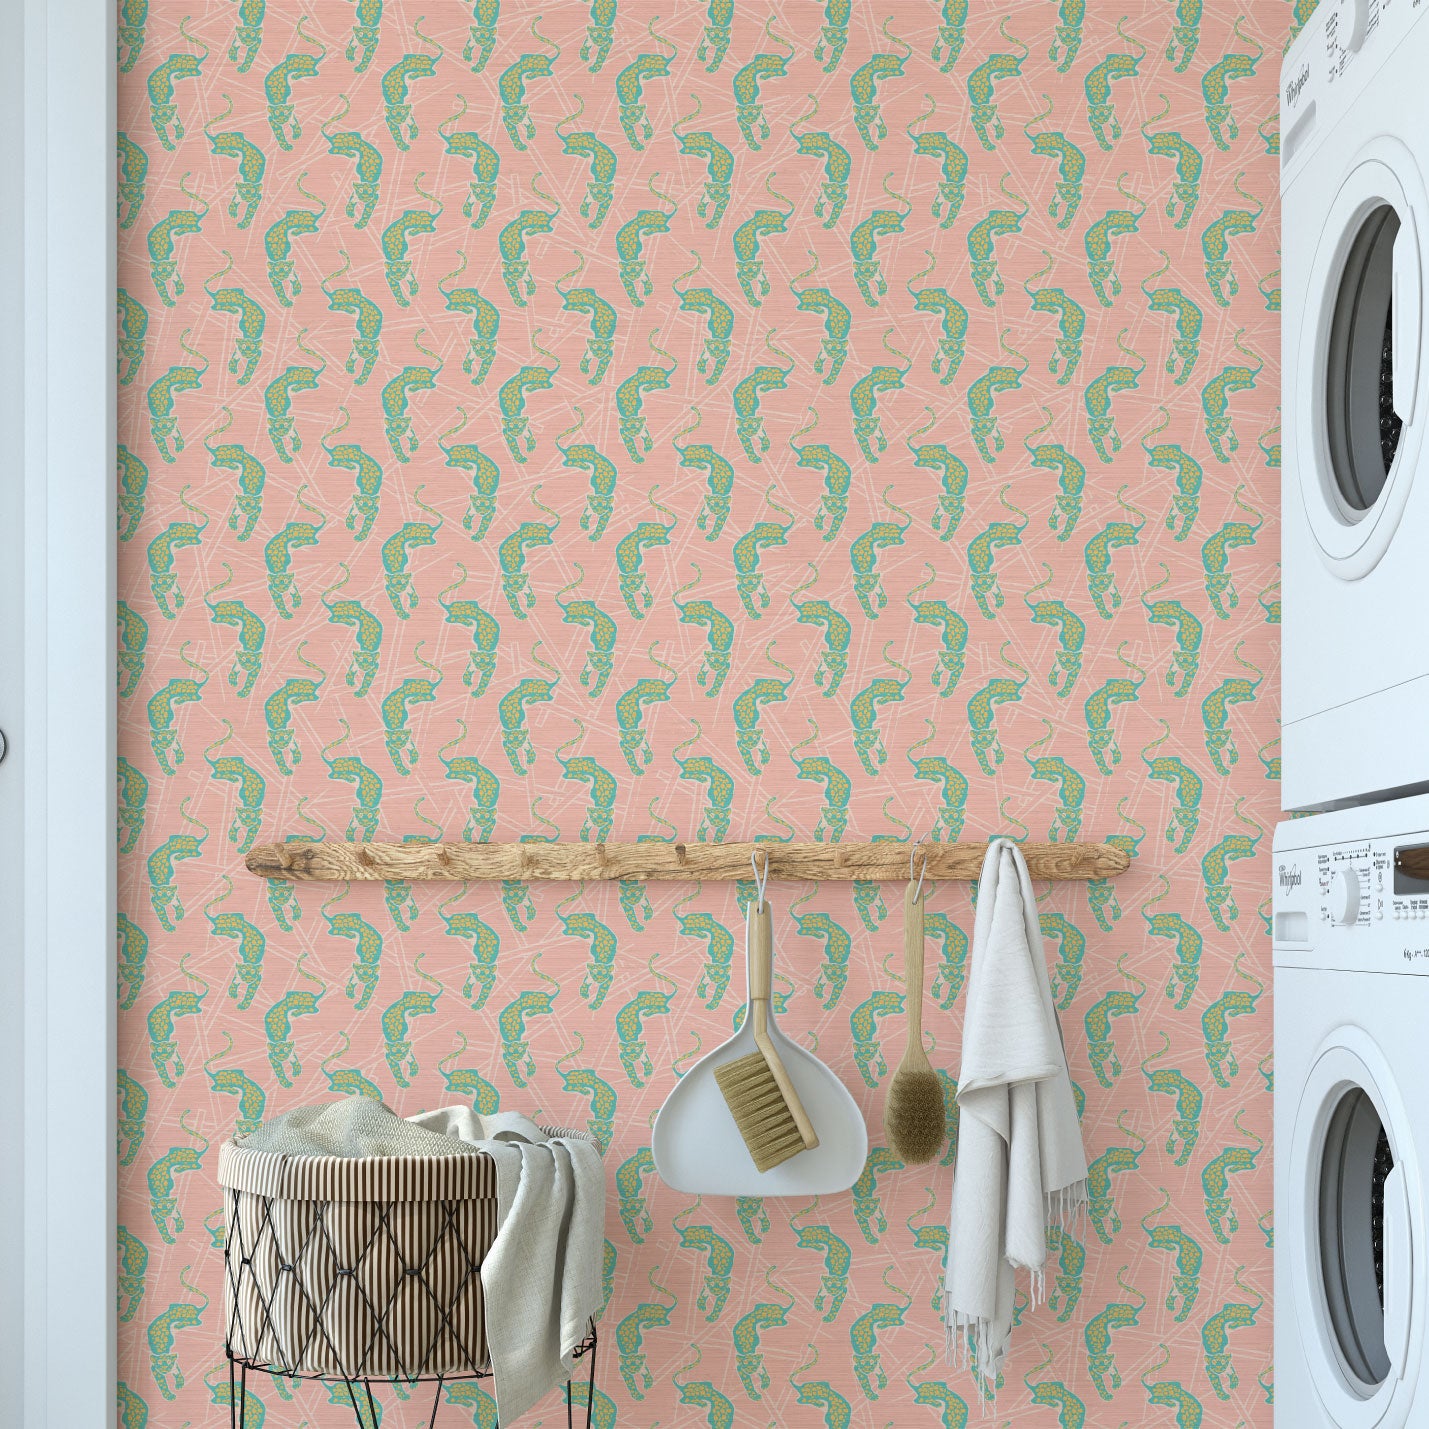 Grasscloth wallpaper Natural Textured Eco-Friendly Non-toxic High-quality Sustainable Interior Design Bold Custom Tailor-made Retro chic Grand millennial Maximalism Traditional Dopamine decor tropical jungle garden vacation animal cheetah mint green coral pink pastel neon